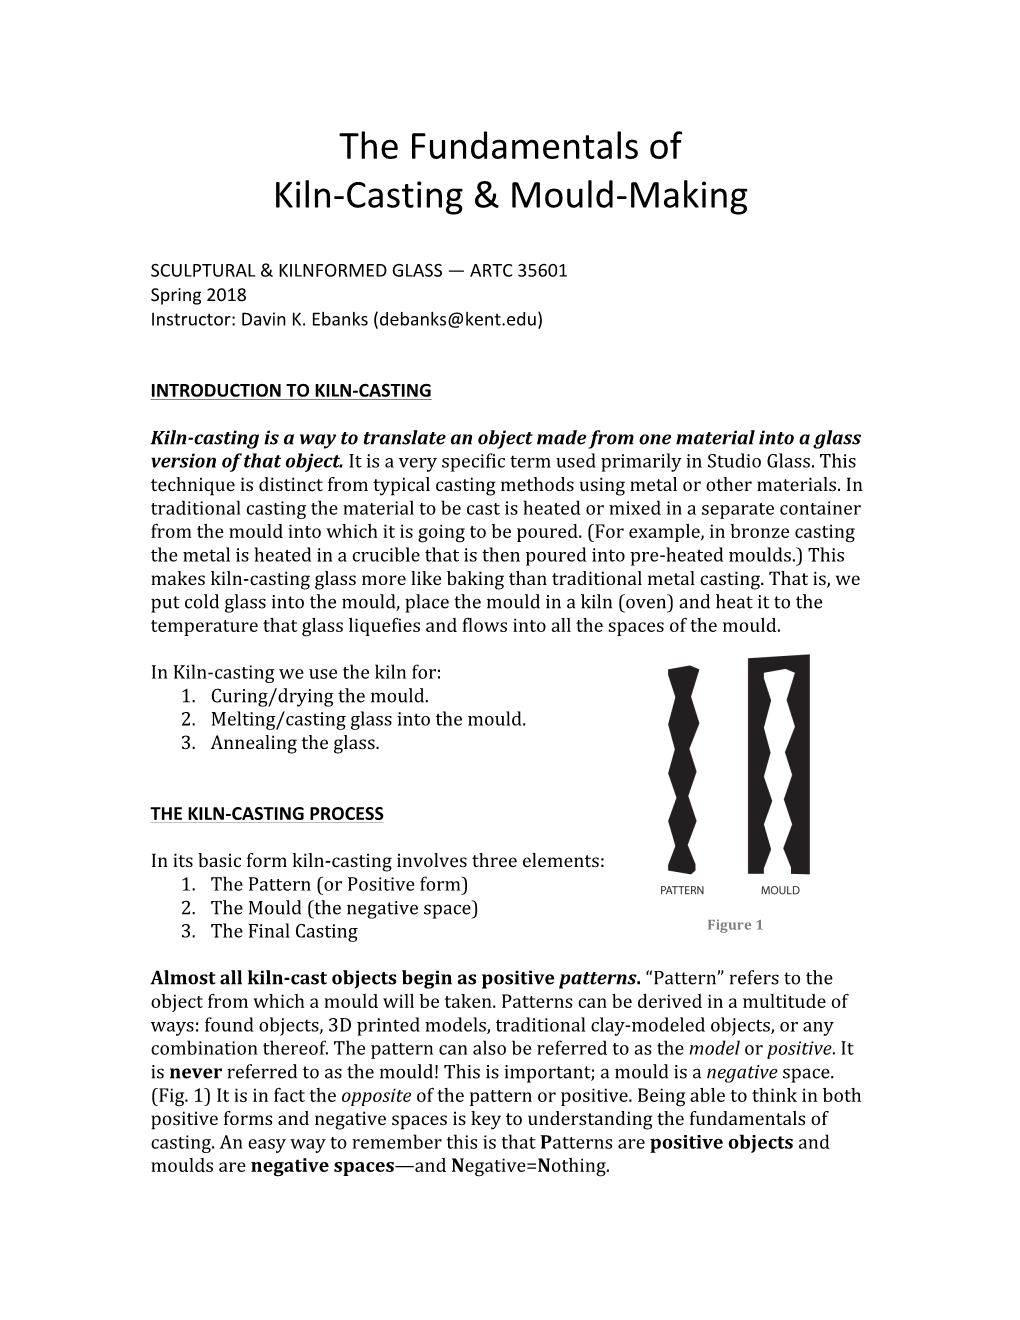 The Fundamentals of Kiln-Casting & Mould-Making